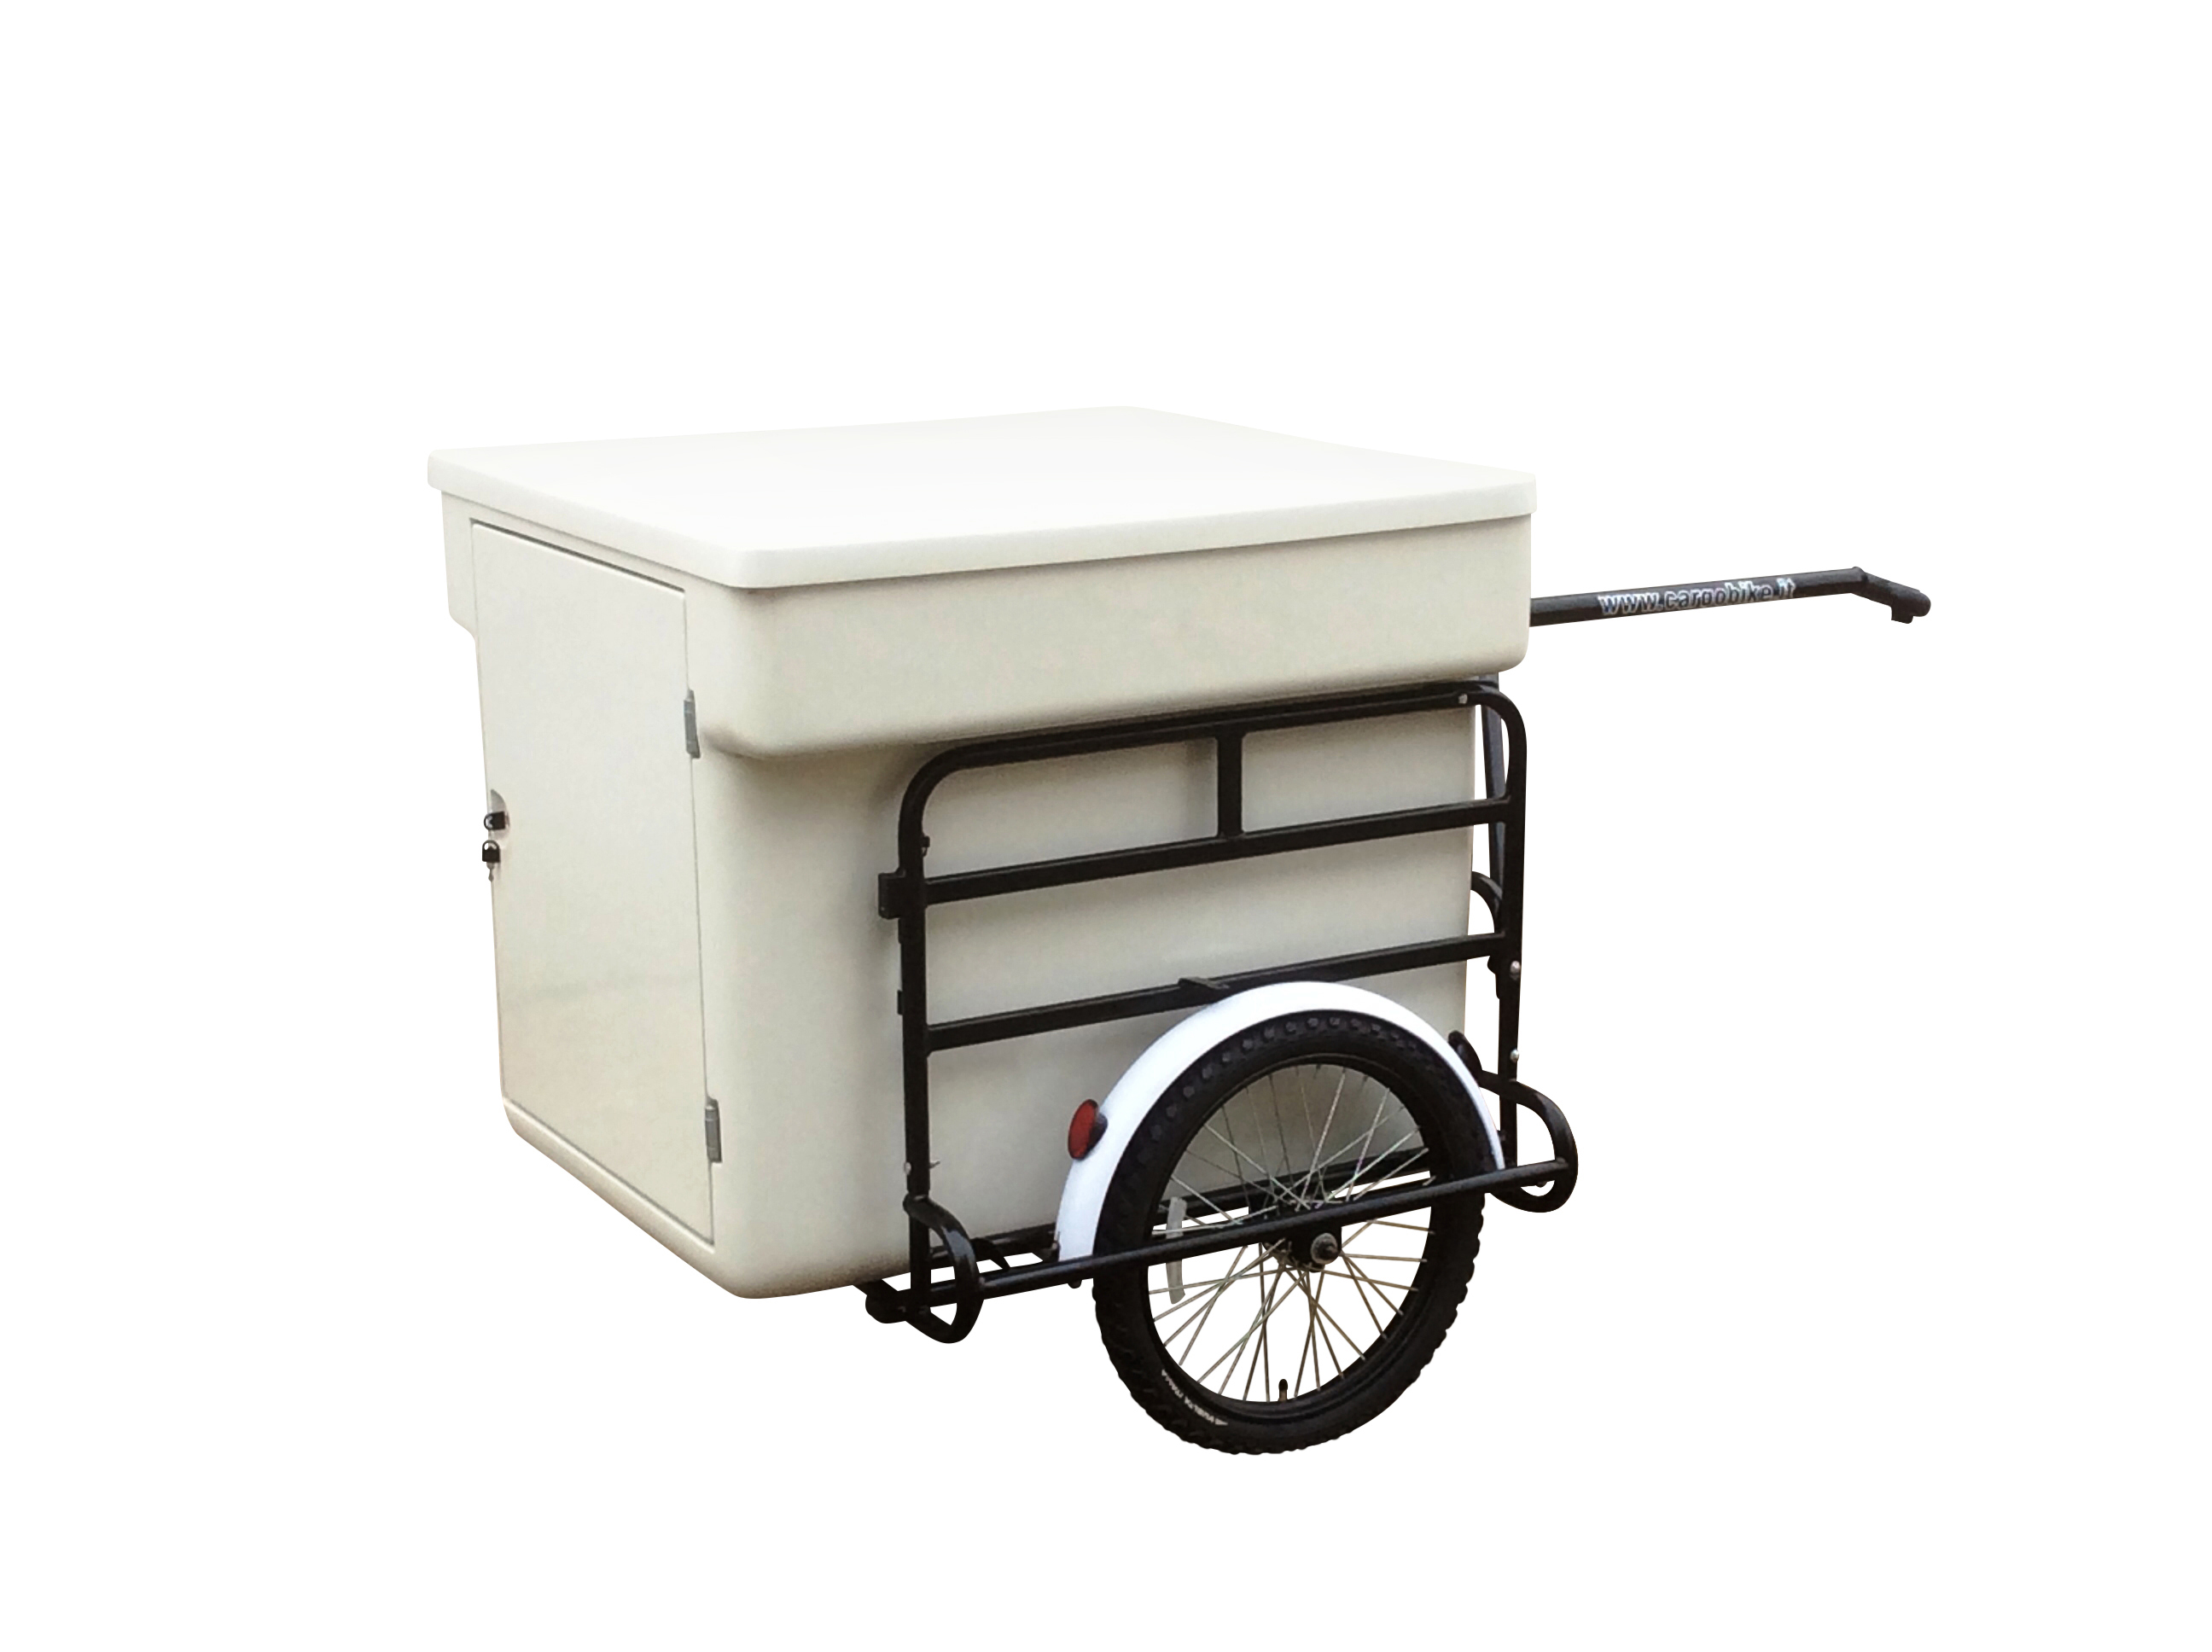 WAGON_TRAILER_FOR_BICYCLE_FOR_STREET_FOOD_CATERING_3